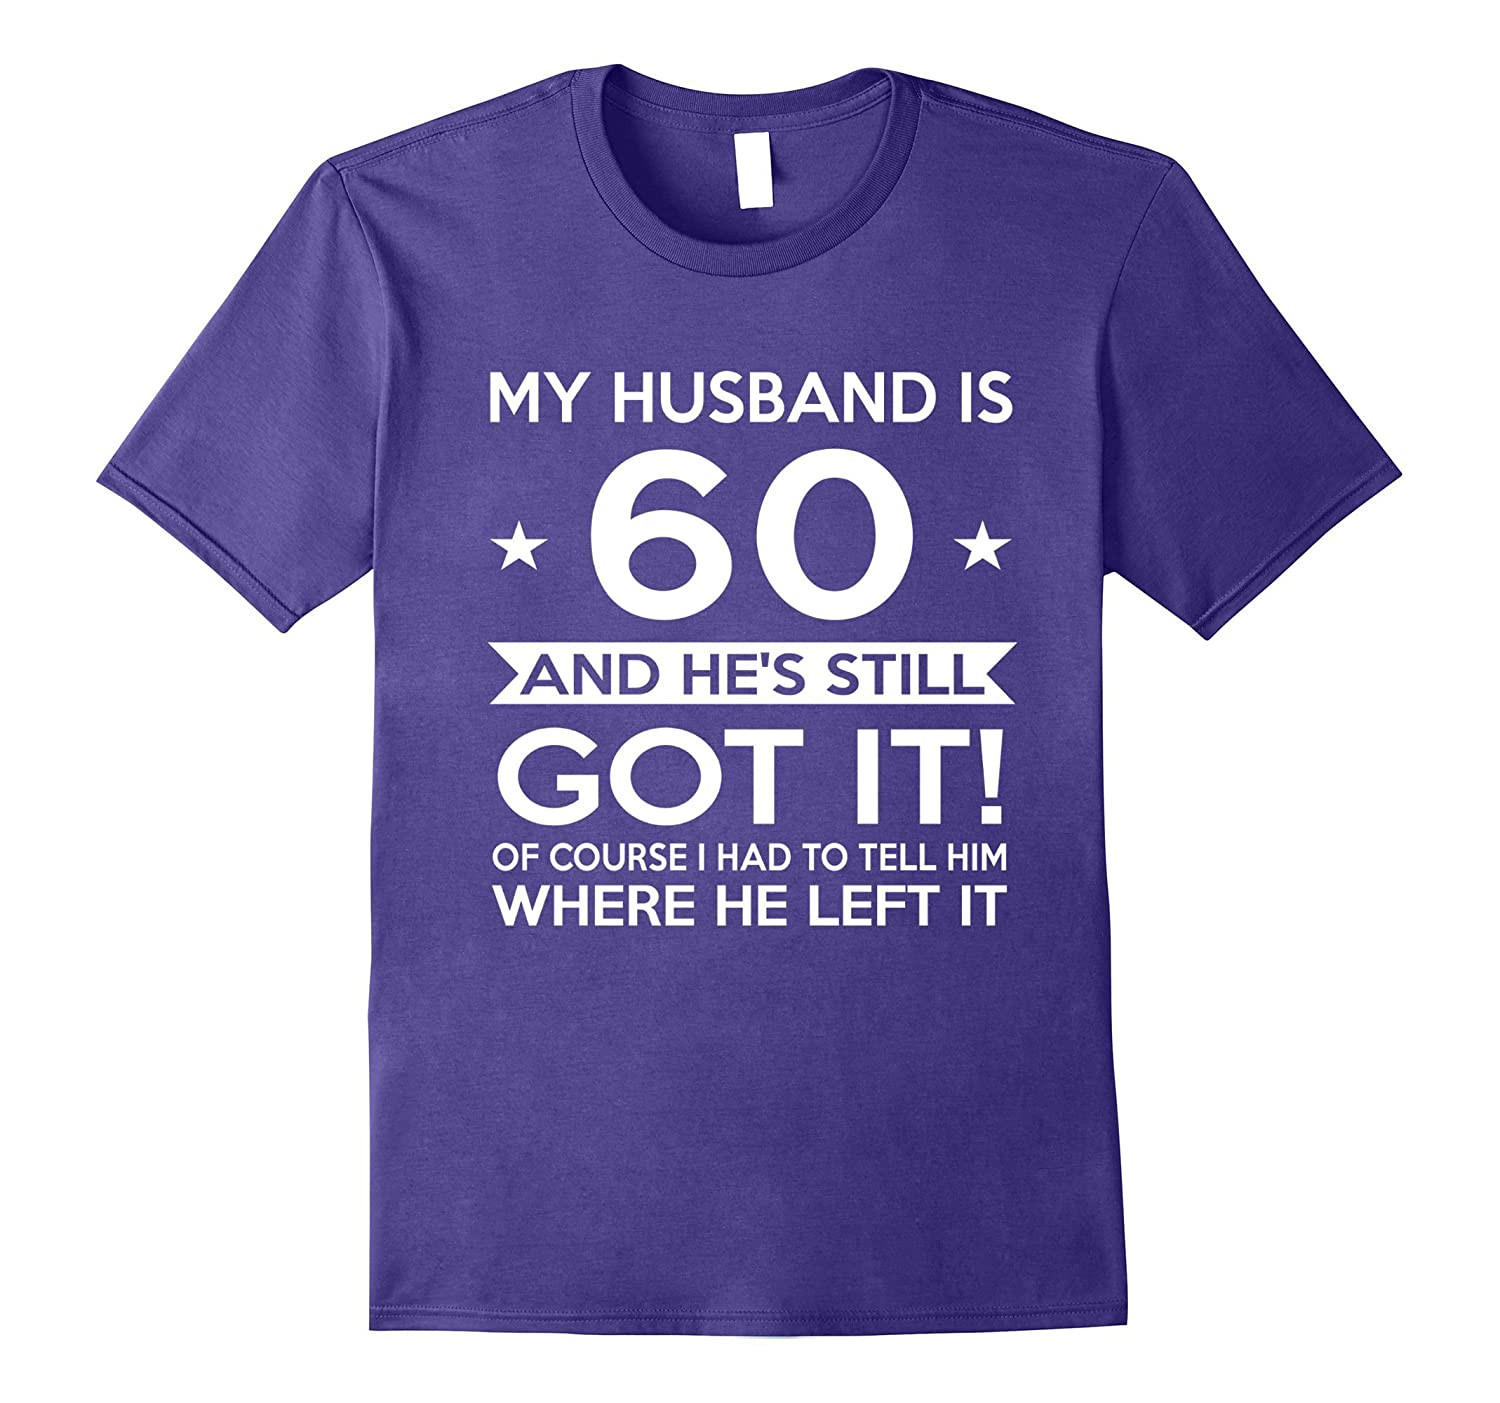 Ideas For 60Th Birthday Gift
 My Husband is 60 60th Birthday Gift Ideas for him CL